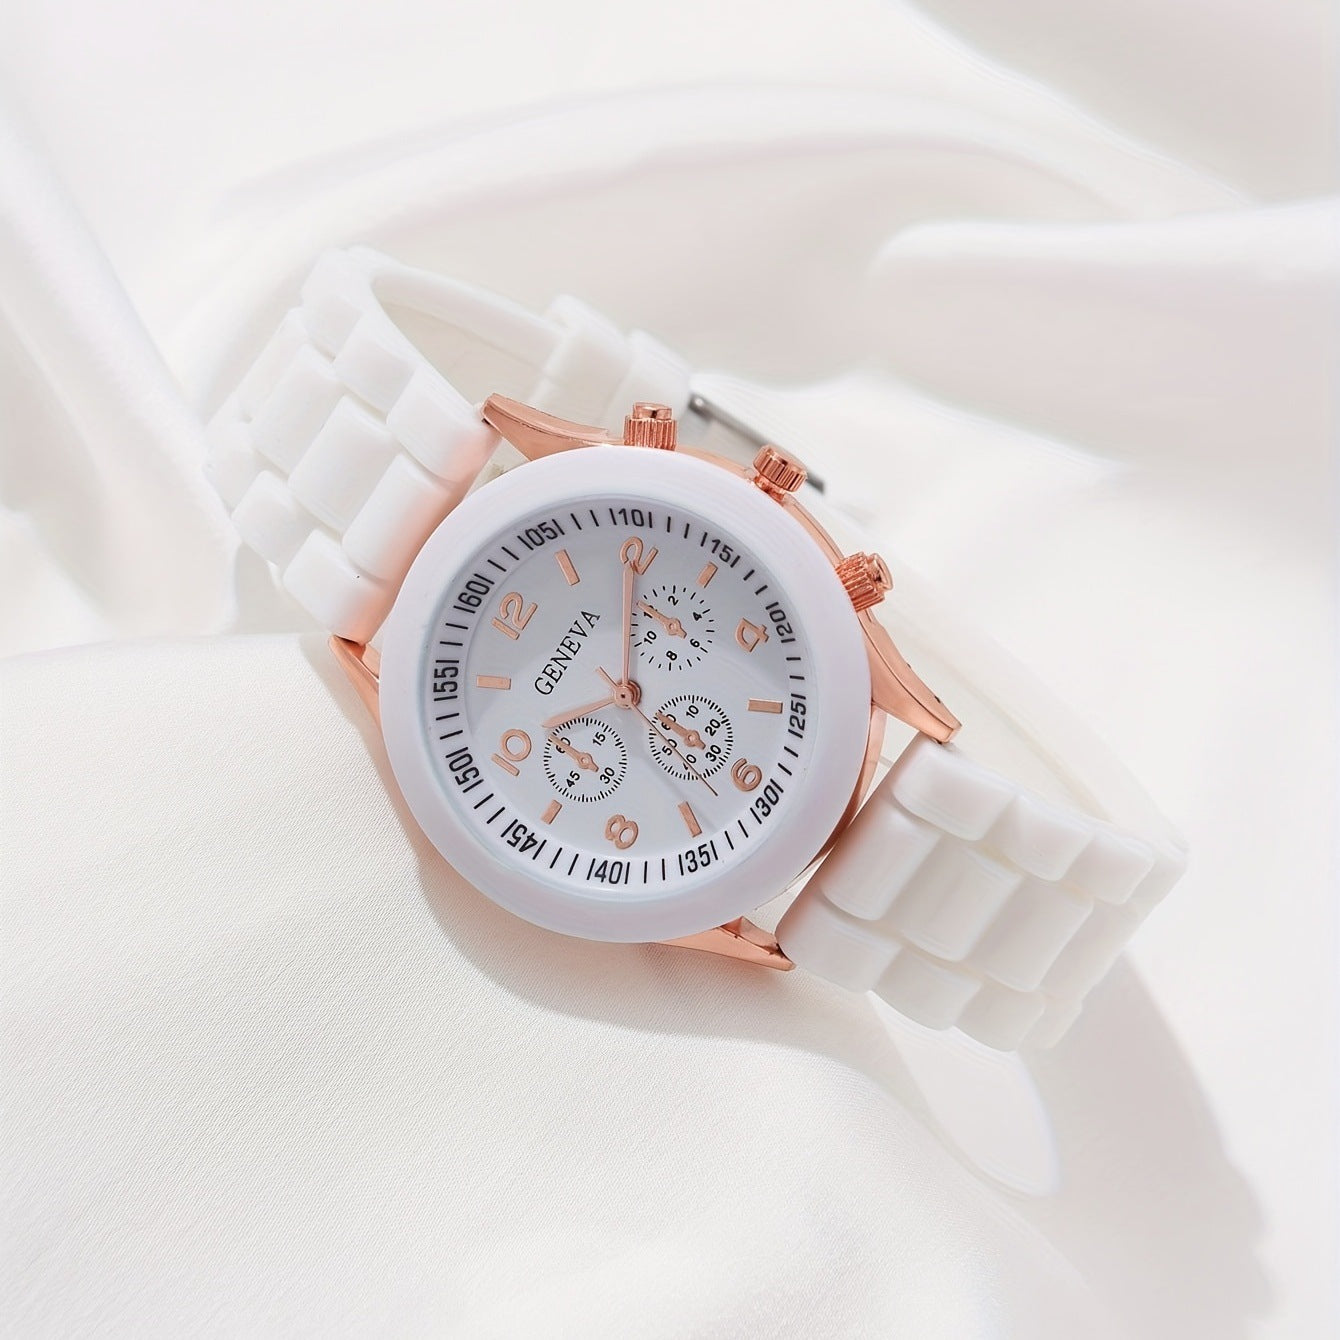 Women's Gift Set With Rubber Strap Watch